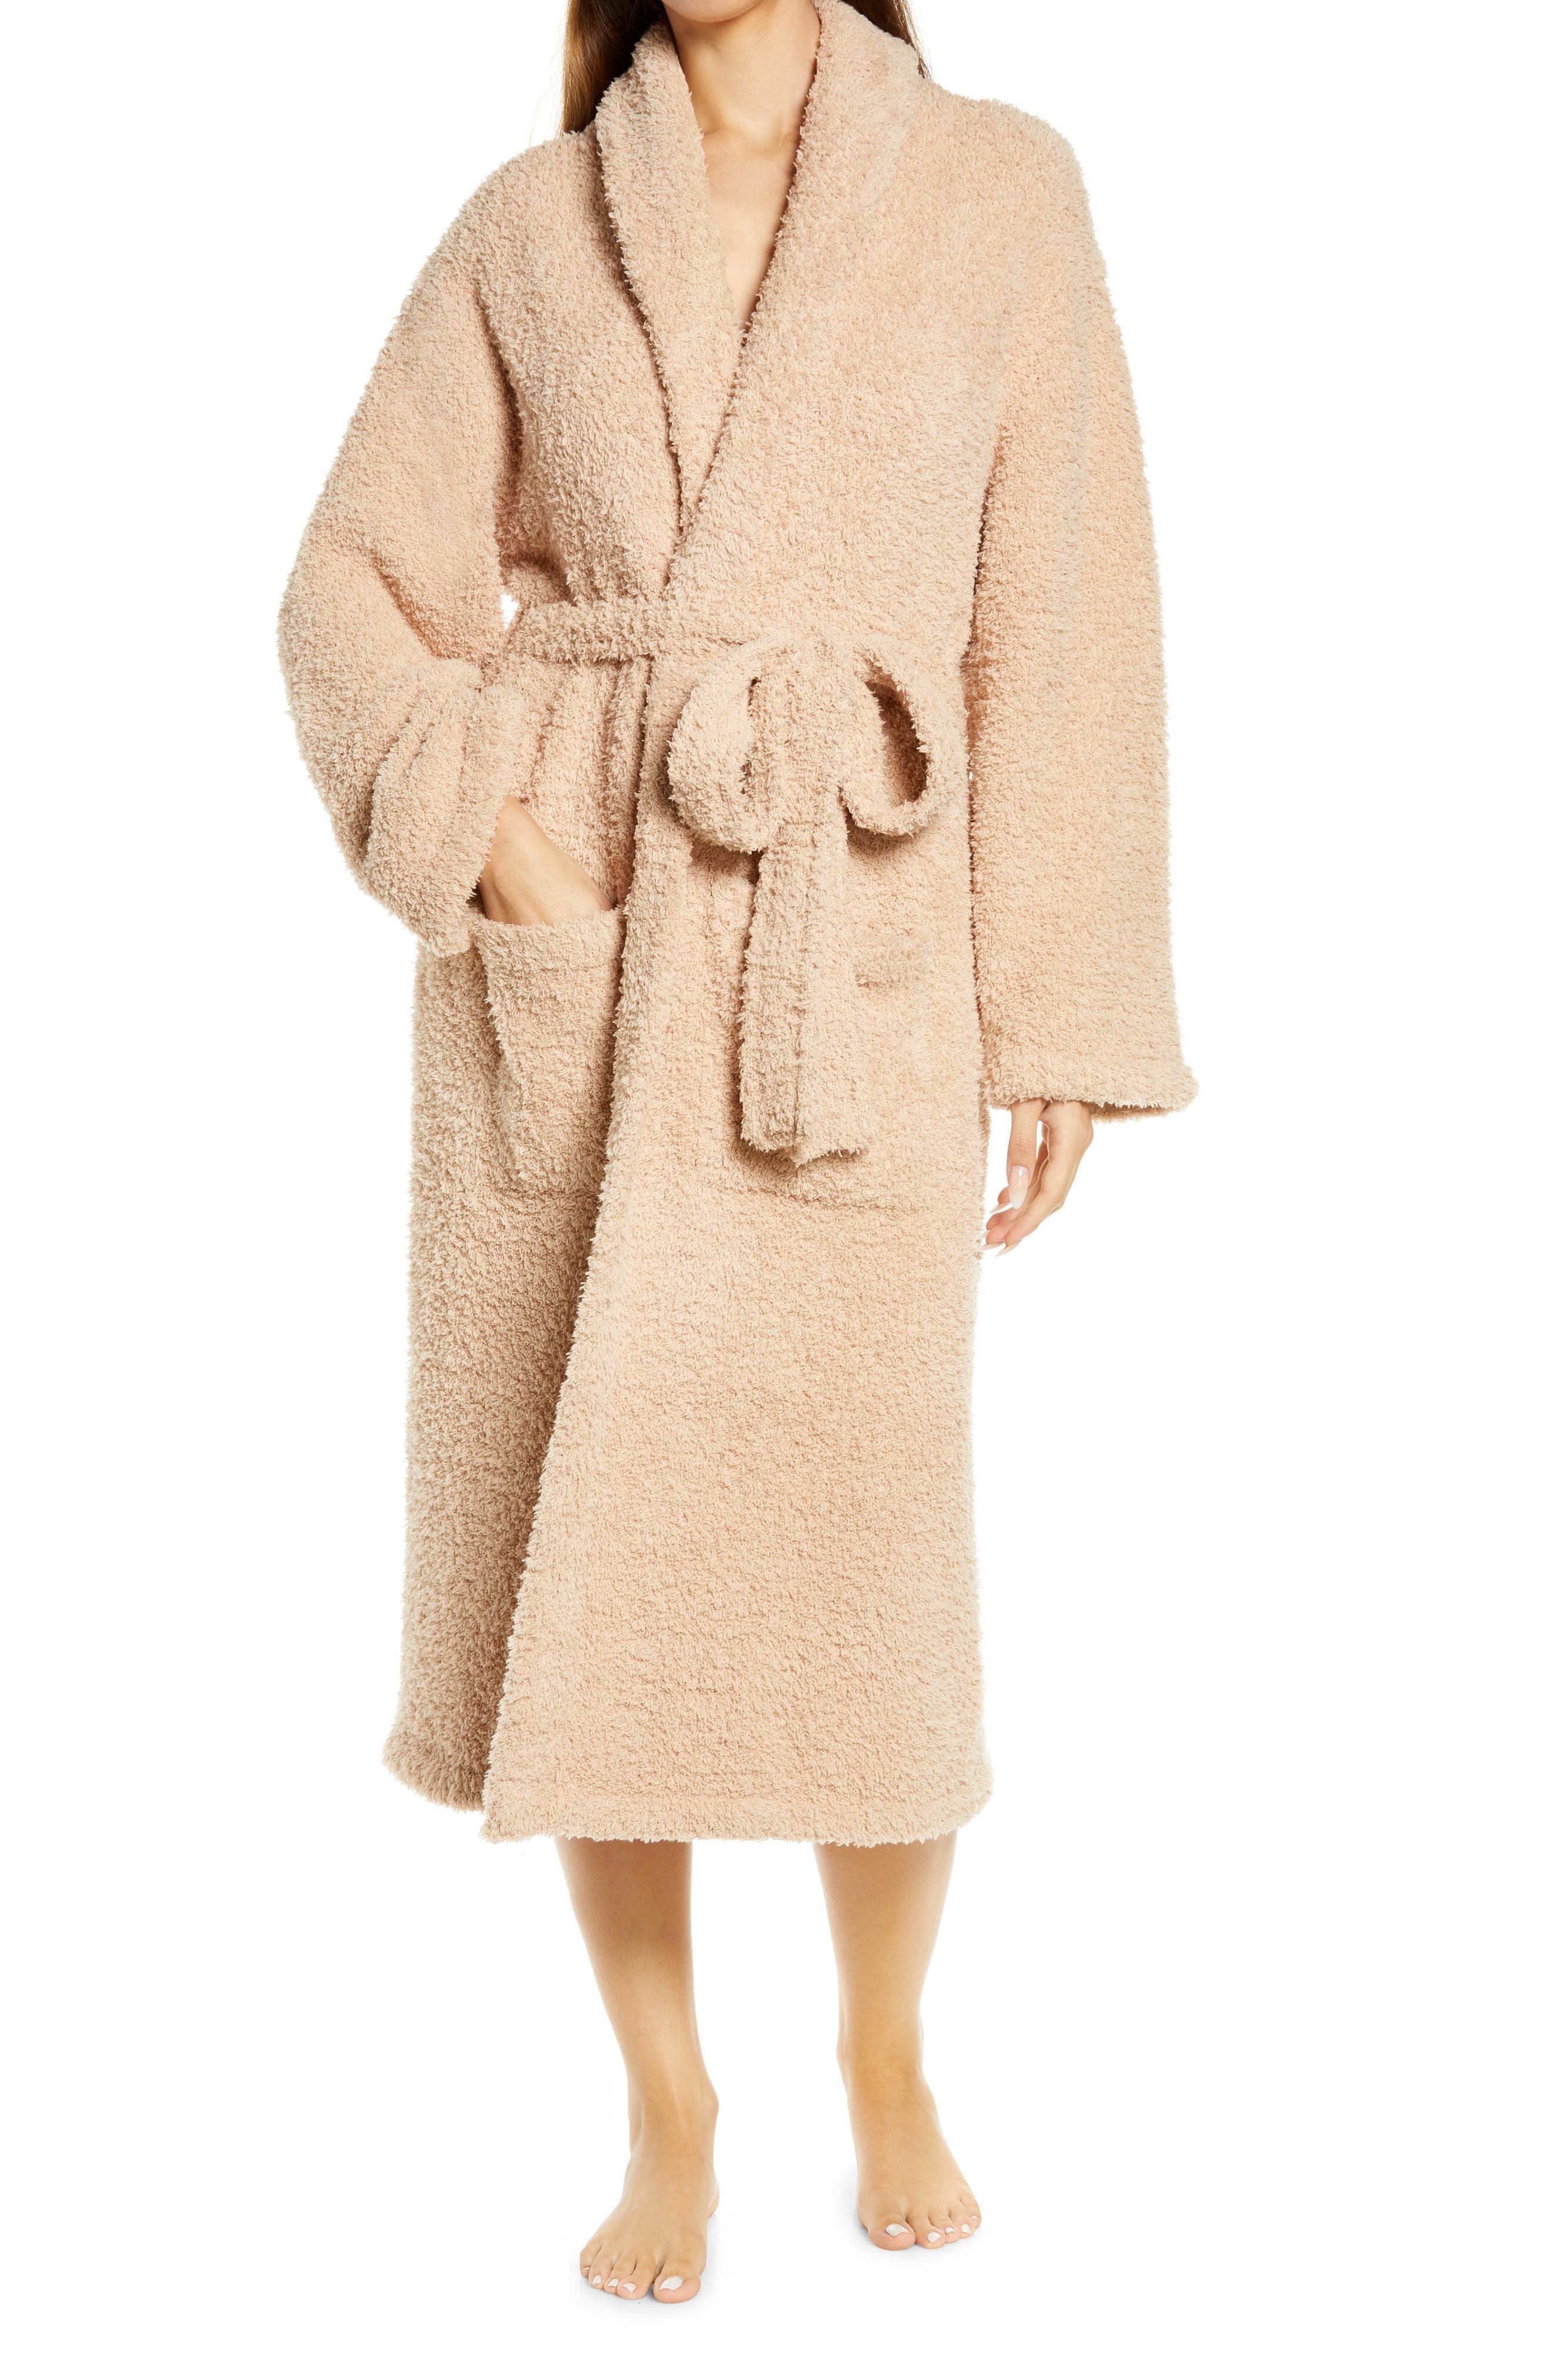 Barefoot Dreams(R) CozyChic(R) Unisex Robe in Soft Camel at Nordstrom, Size 2 | Nordstrom